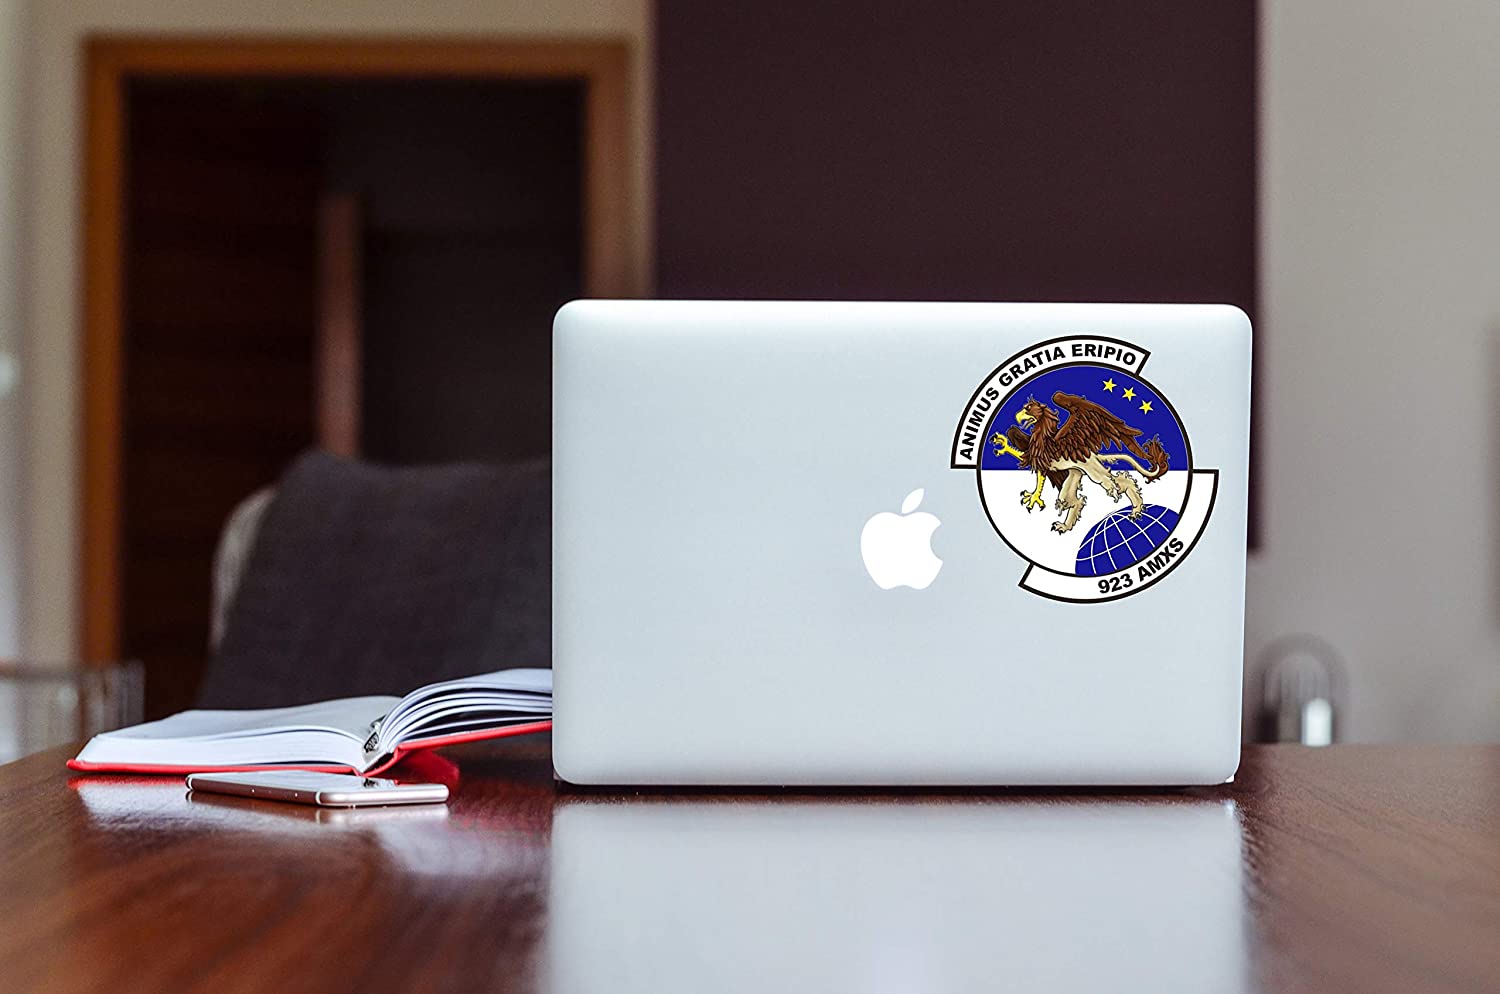 923rd AMXS Squadron - Patch Vinyl Decal - Available in Multiple Sizes